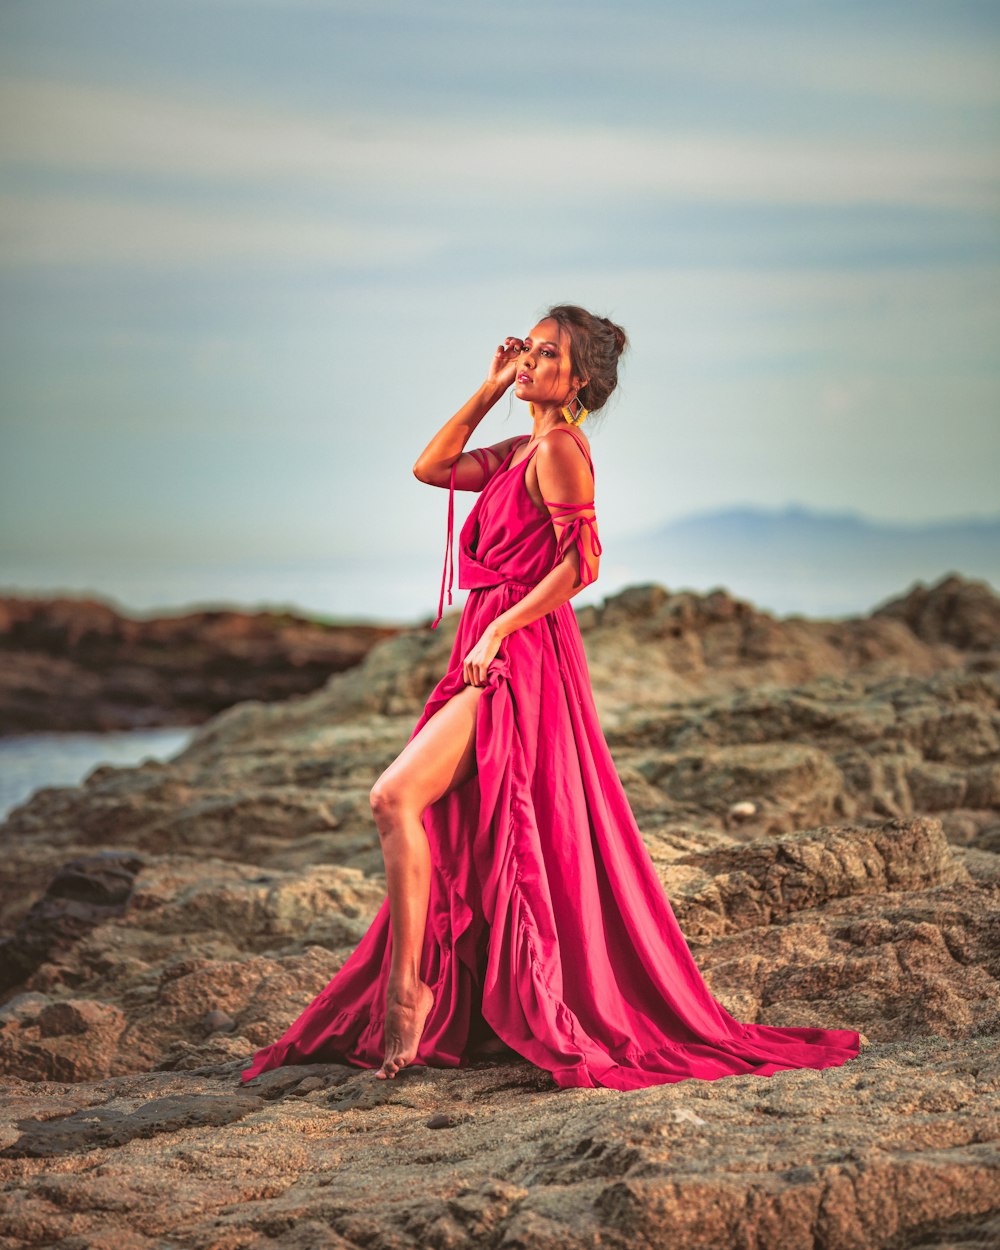 woman in pink dress standing on brown sand near body of water during daytime